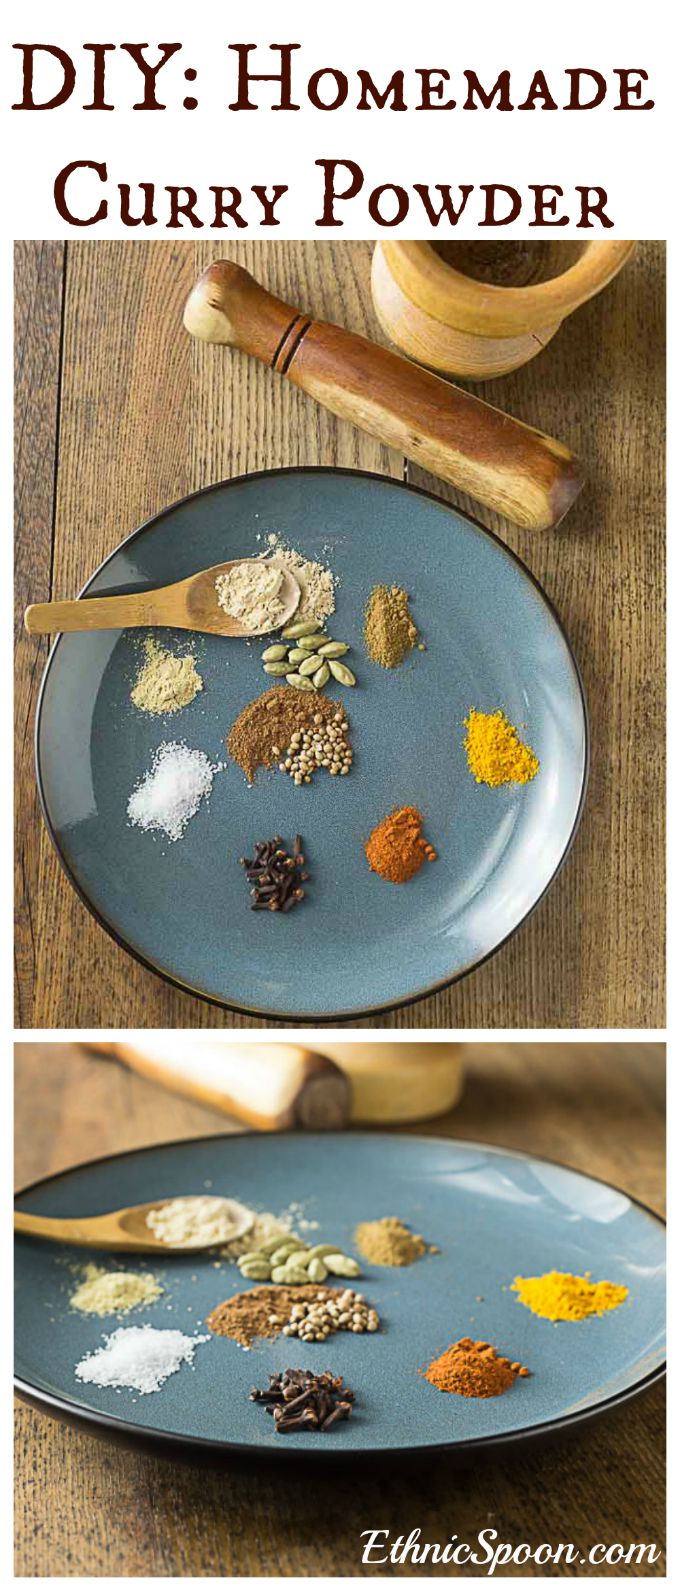 DIY: A really easy recipe to make your own curry powder and a history of curry.